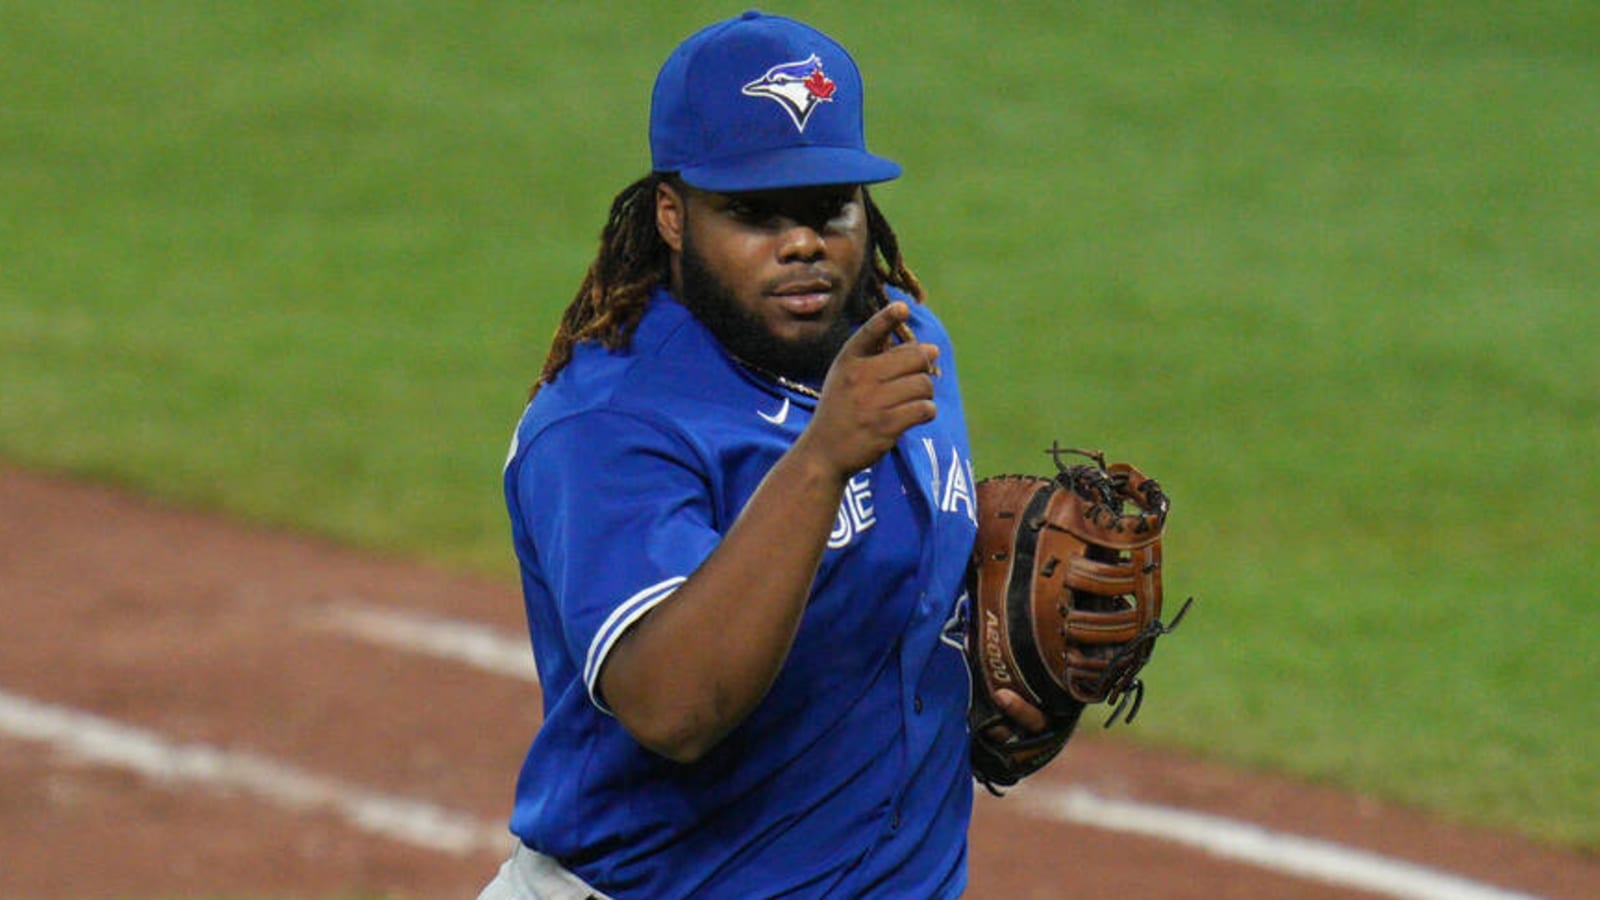 Watch: Vladimir Guerrero Jr. throws runner out with smooth behind-the-back toss